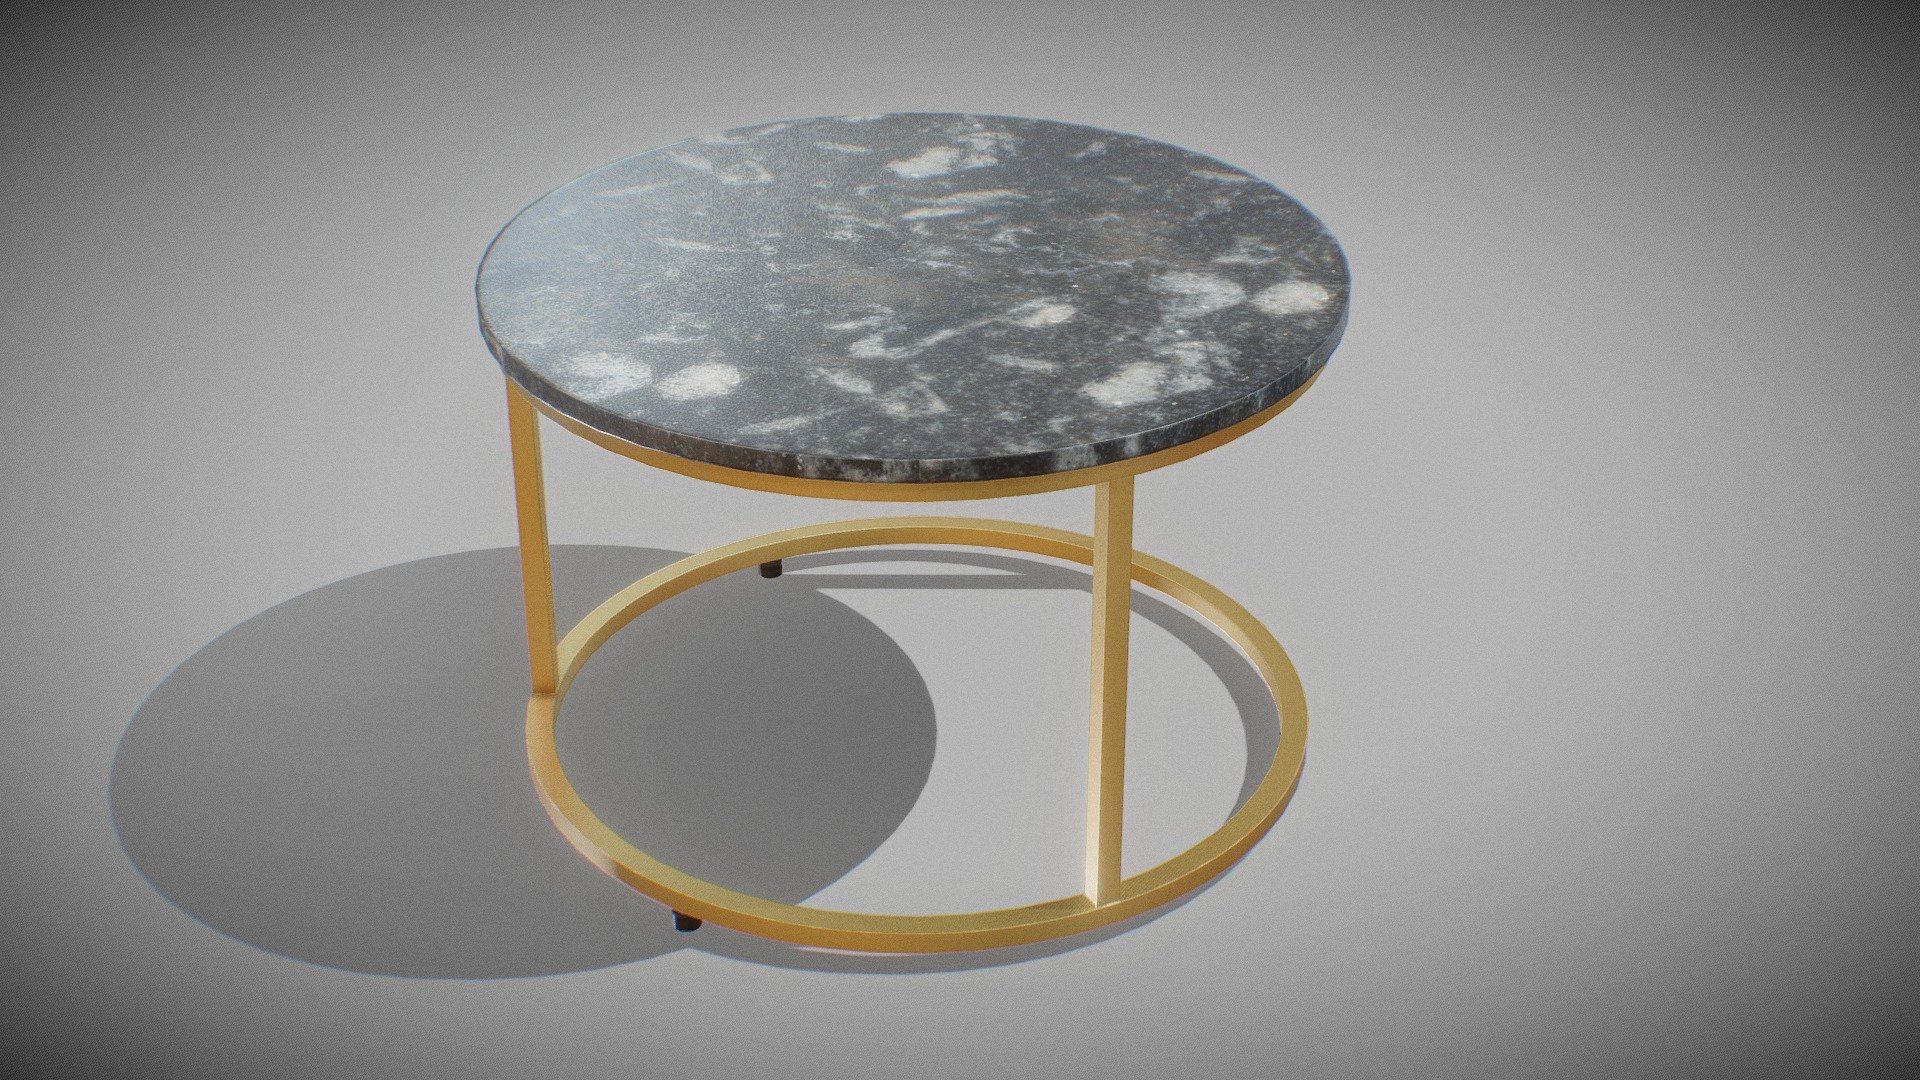 3d model of a table made of marble for using in decoration in arch-viz. The model was created in latest version of Blender and textured in Substance Painter. It is in real proportions.

4096 x 4096 resolution of textures.

Metalnessworkflow- BaseColor, Normal, Metalness,Height, Ambient Occlusion and Roughness Textures - PNG 3d model